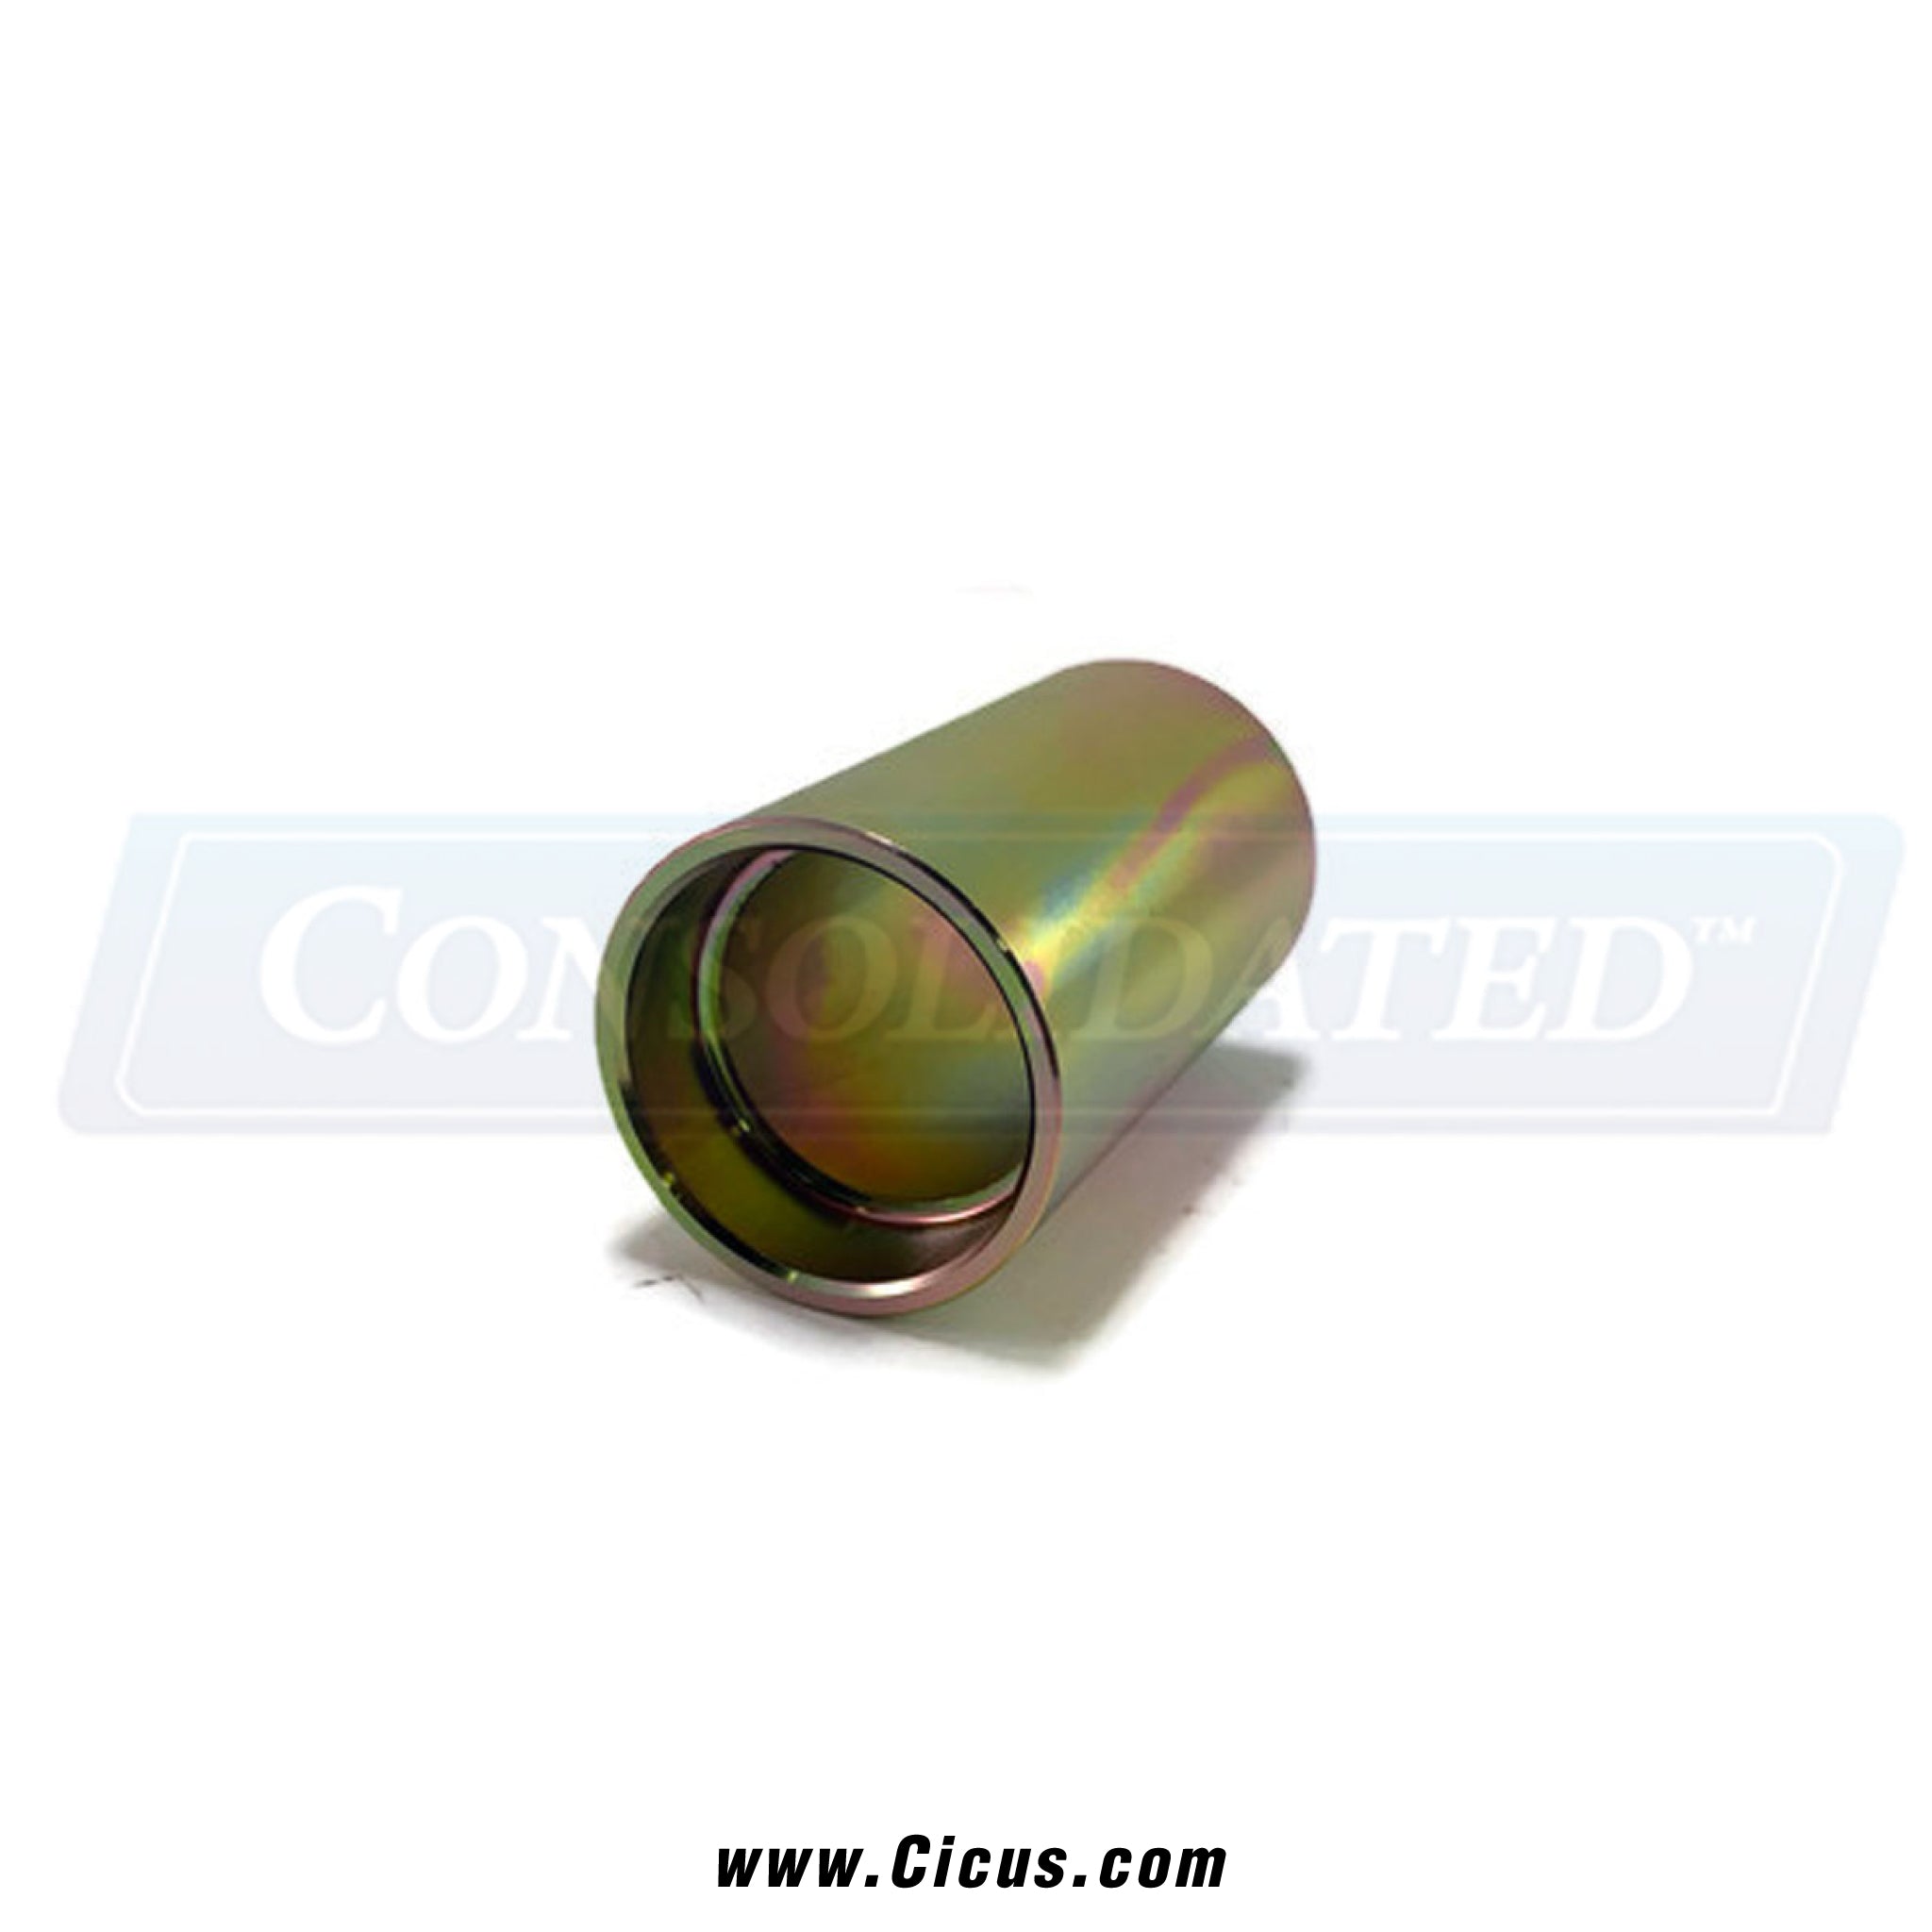 Replacement Chicago Dryer Roll 2-1/4" Long w/ 3/8" Bearings [1205-028]